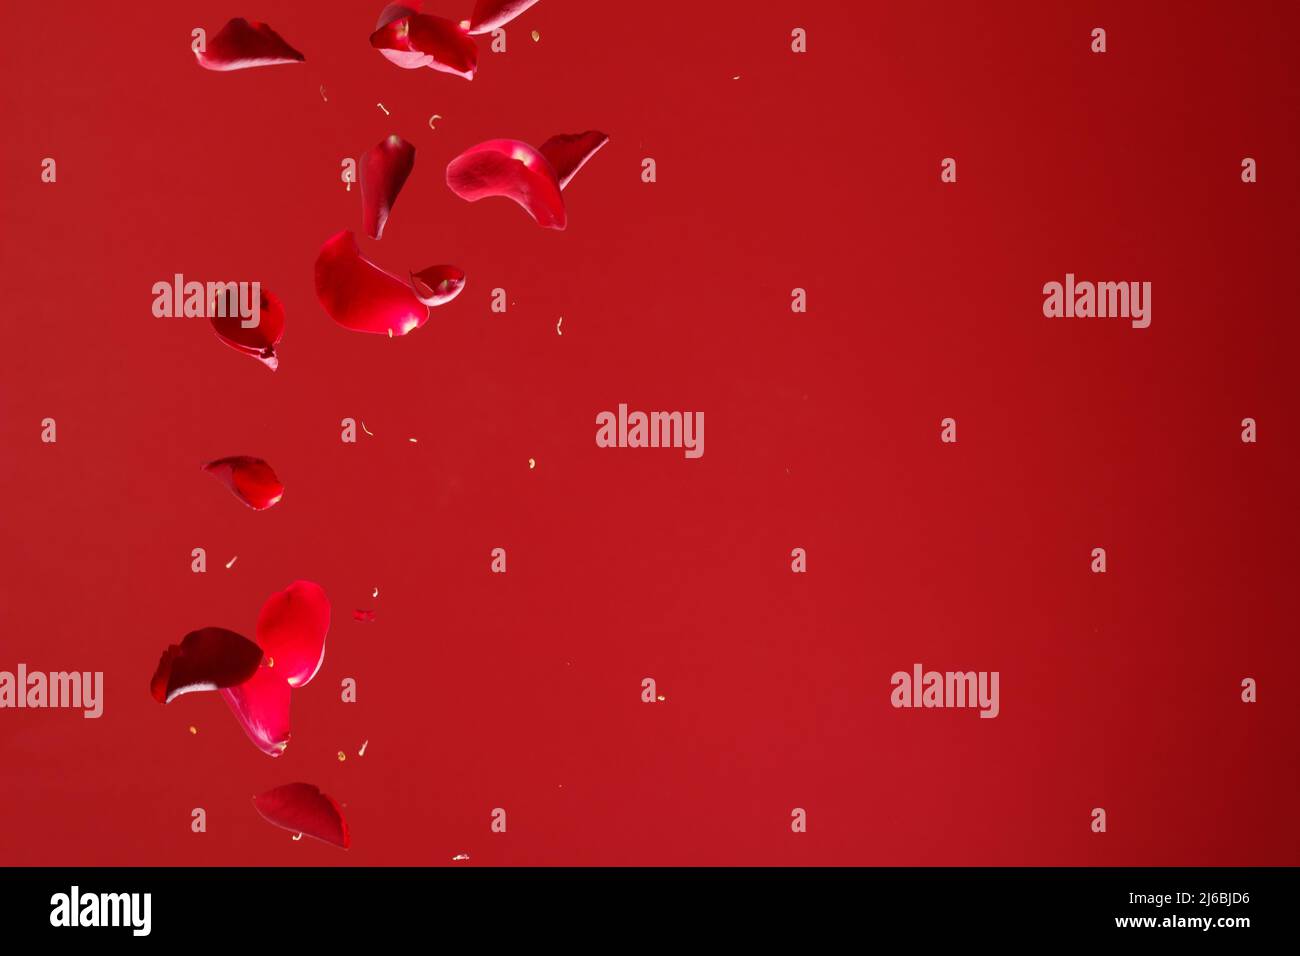 Red Rose Petals Falling in Front of Red Background Stock Photo